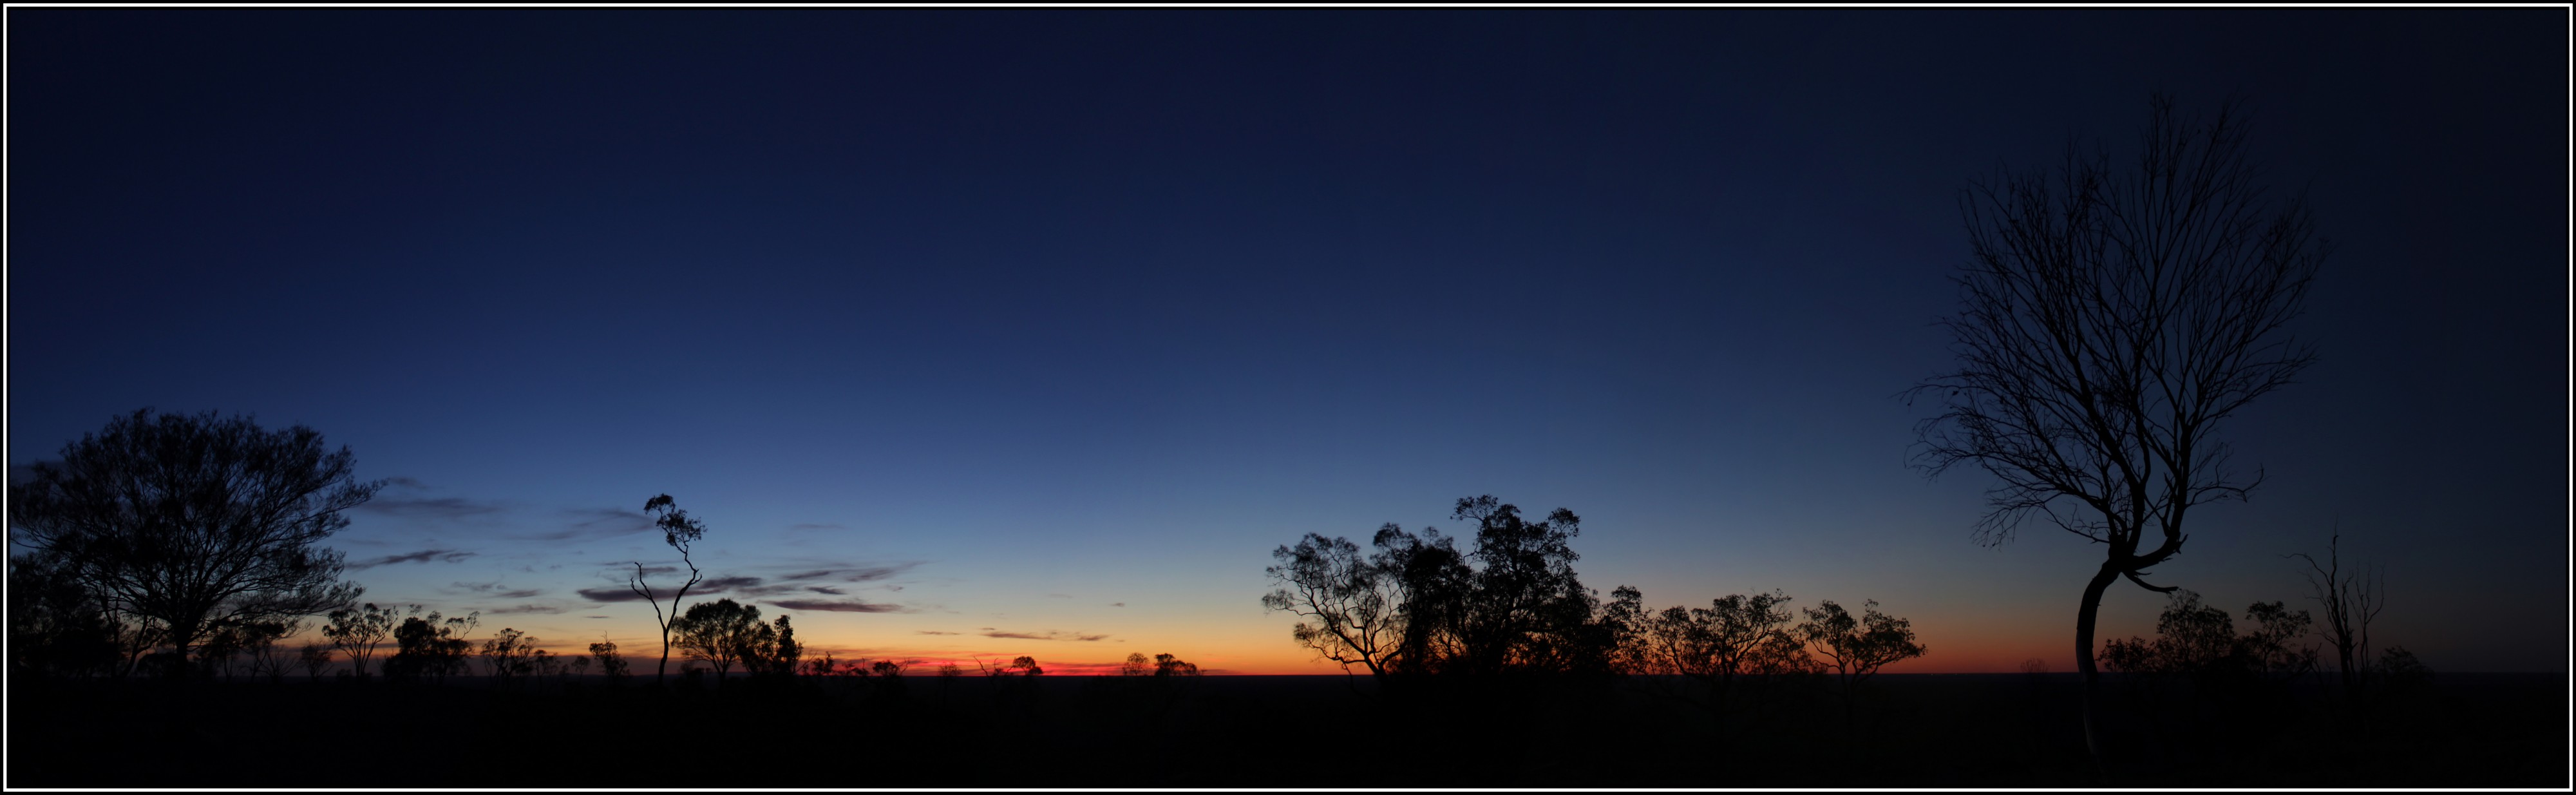 Sunset from Mount Oxley, Bourke, NSW, Dec 2013 - Mt Oxley sunset. Peter Neaum. - panoramio